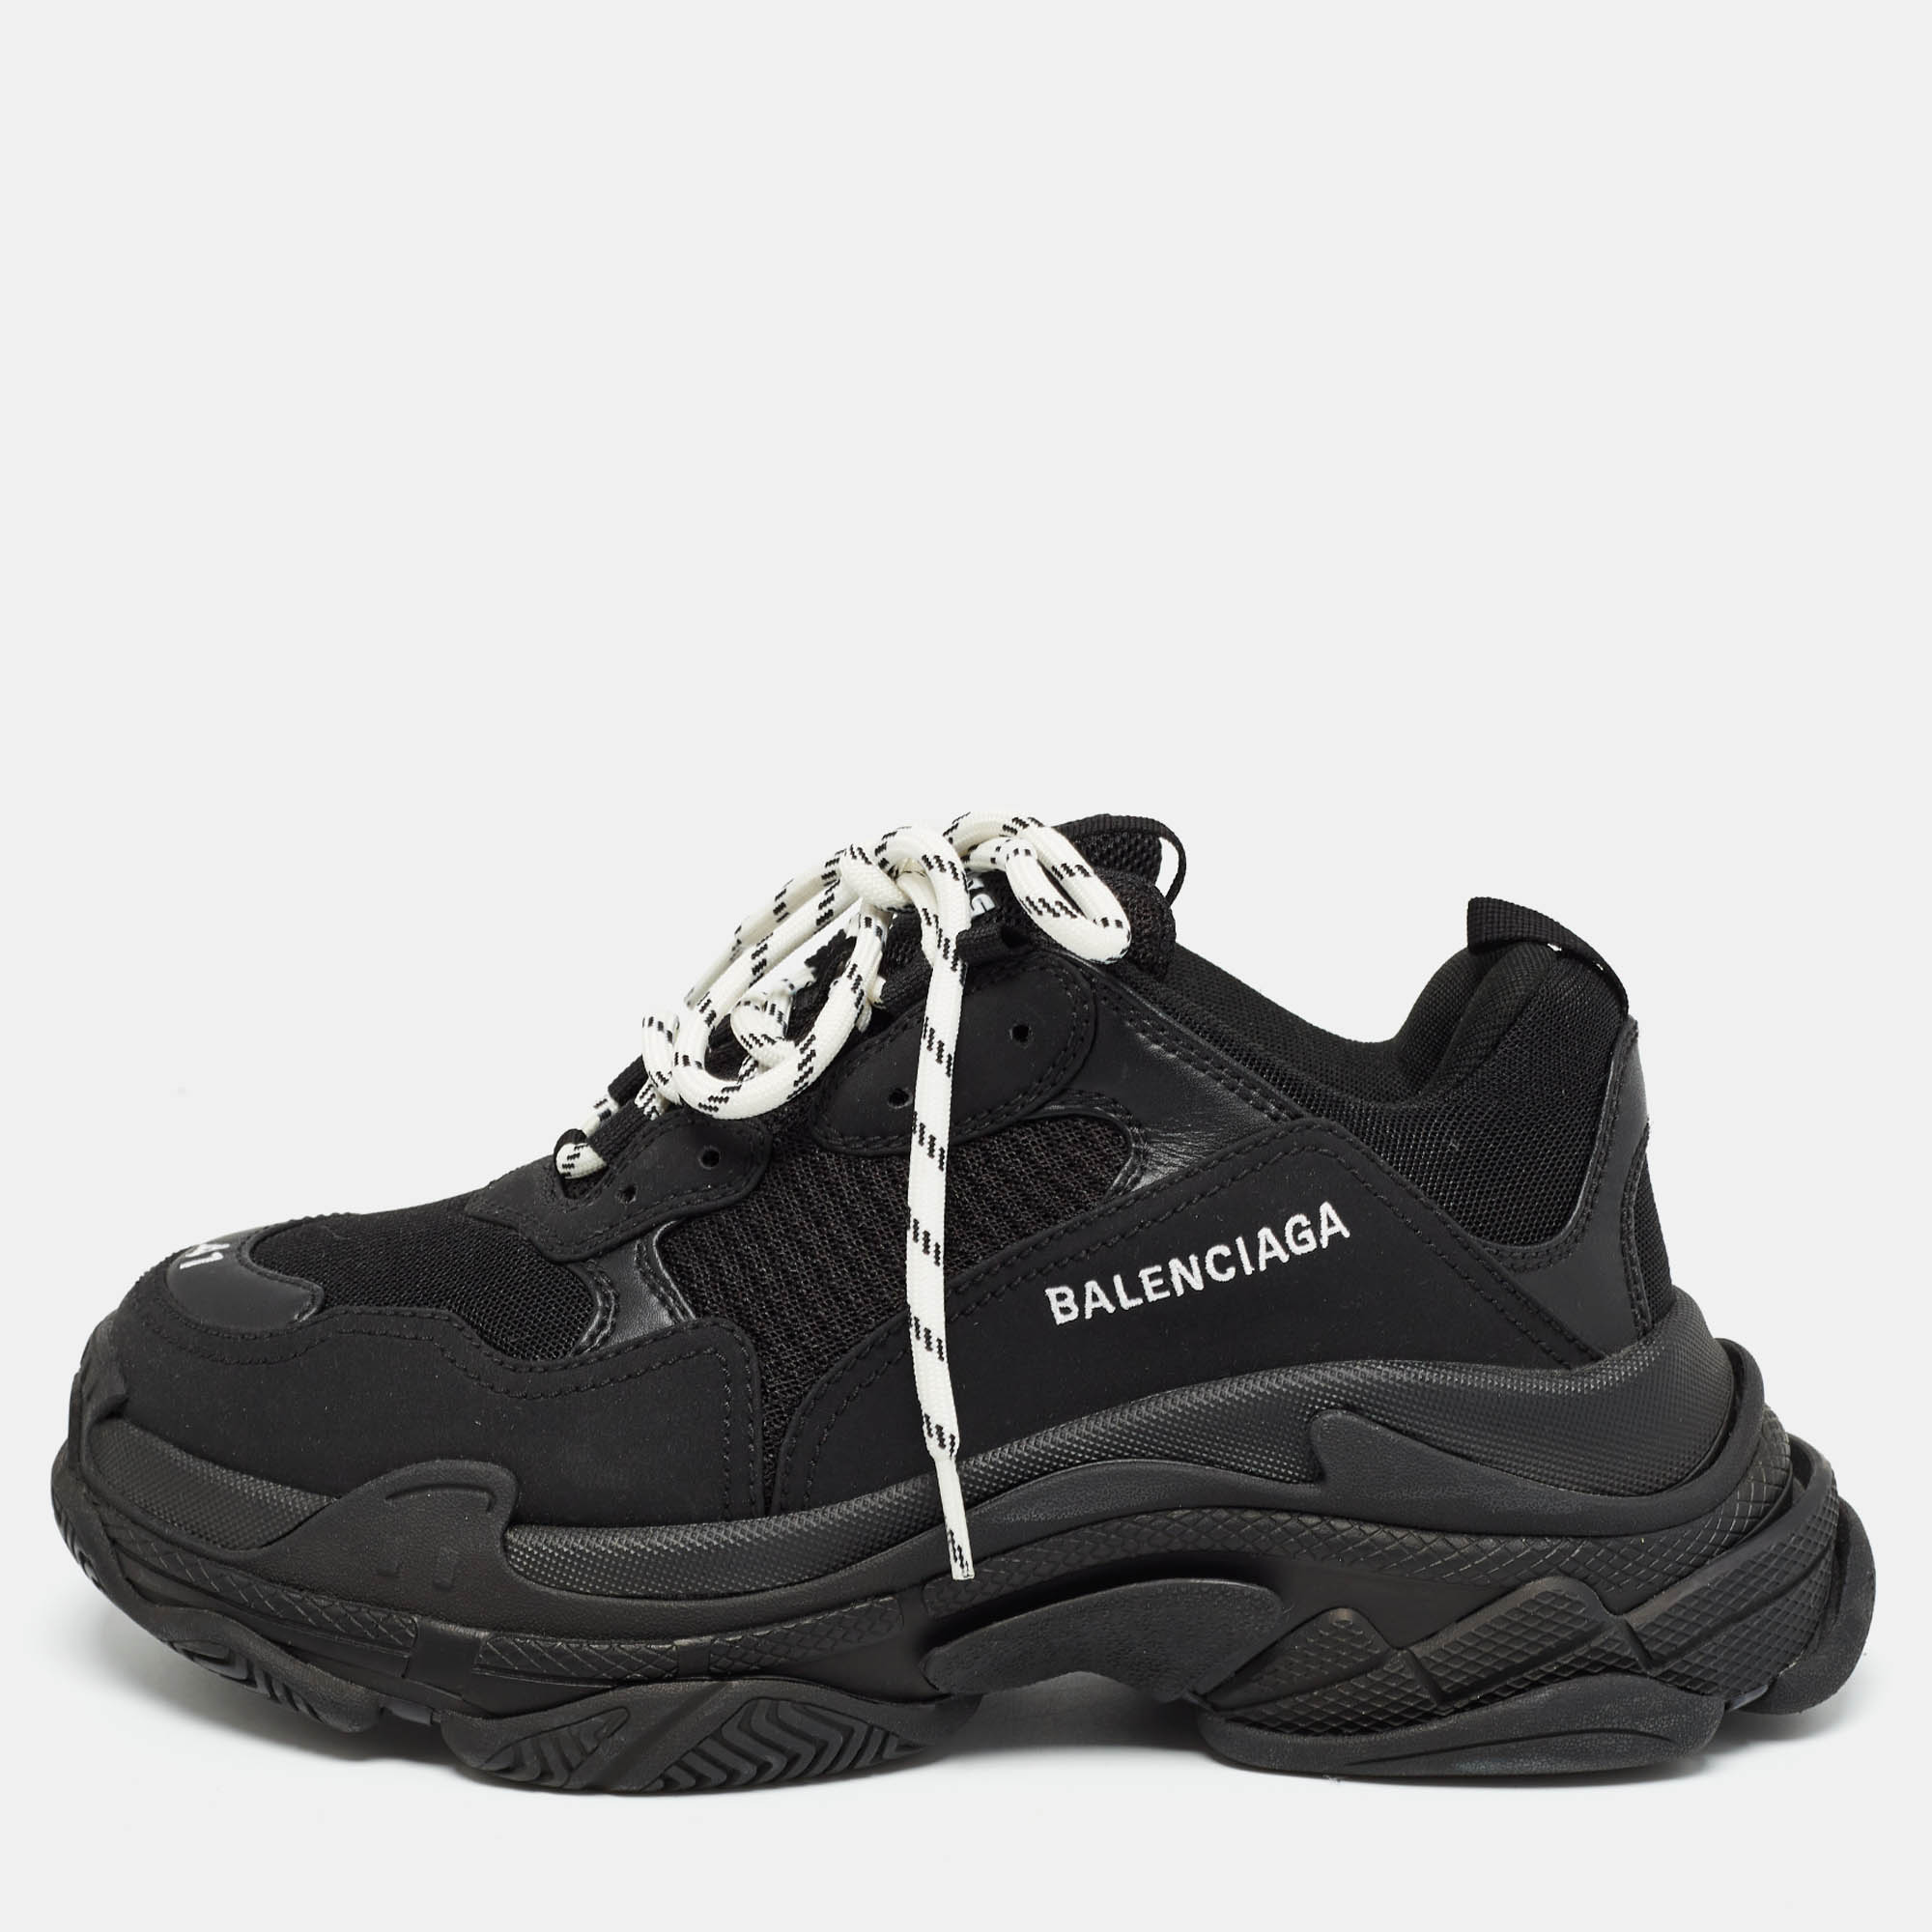 Pre-owned Balenciaga Black Mesh And Faux Leather Triple S Trainers Size 41